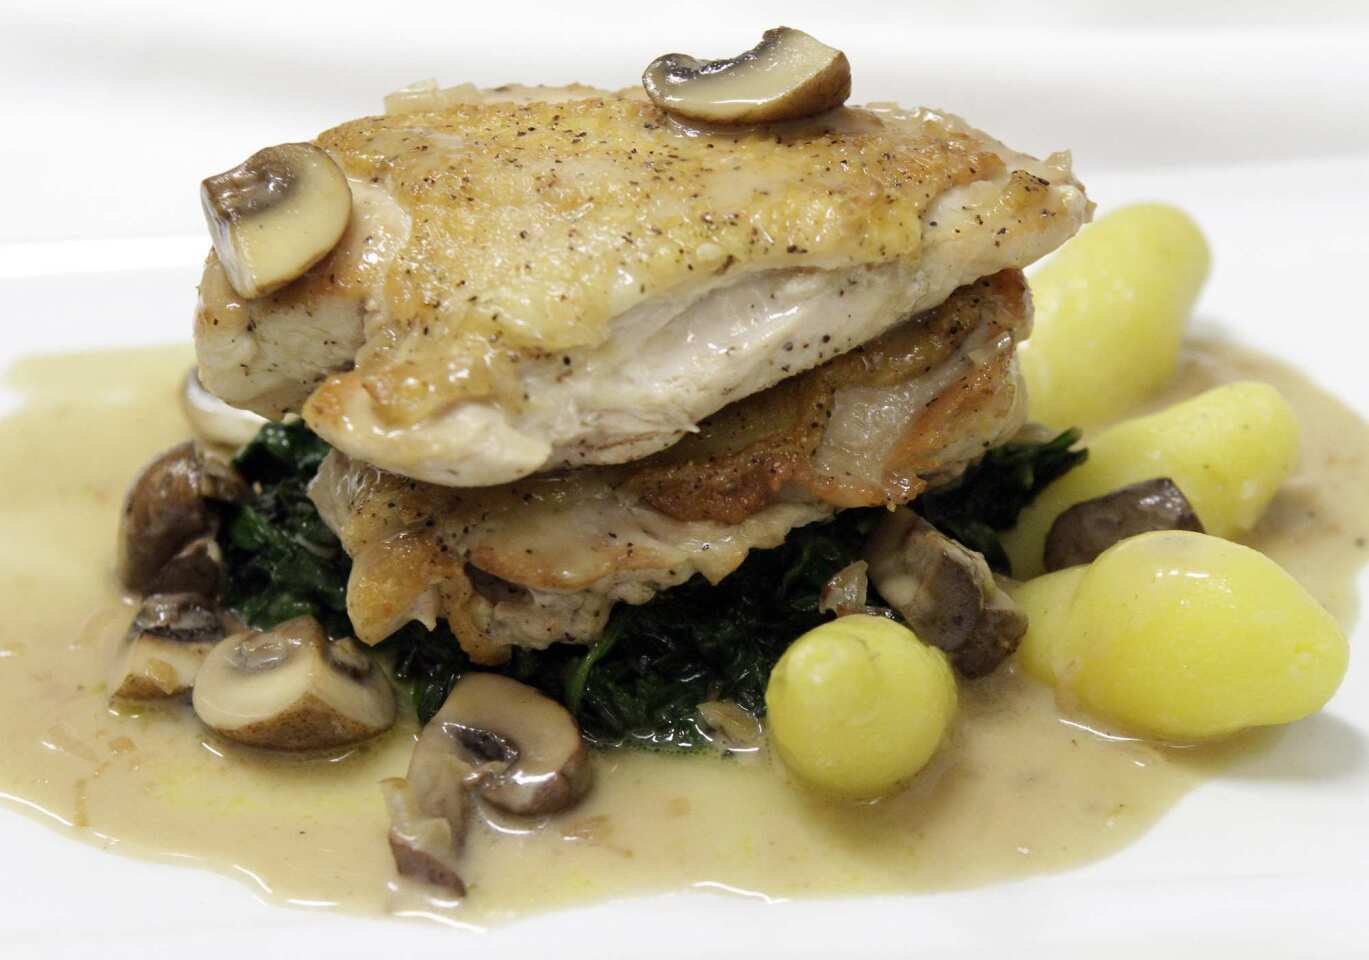 Pan-roasted chicken comes with Marsala sauce, sauteed garlic spinach, mushrooms and fingerling potatoes.